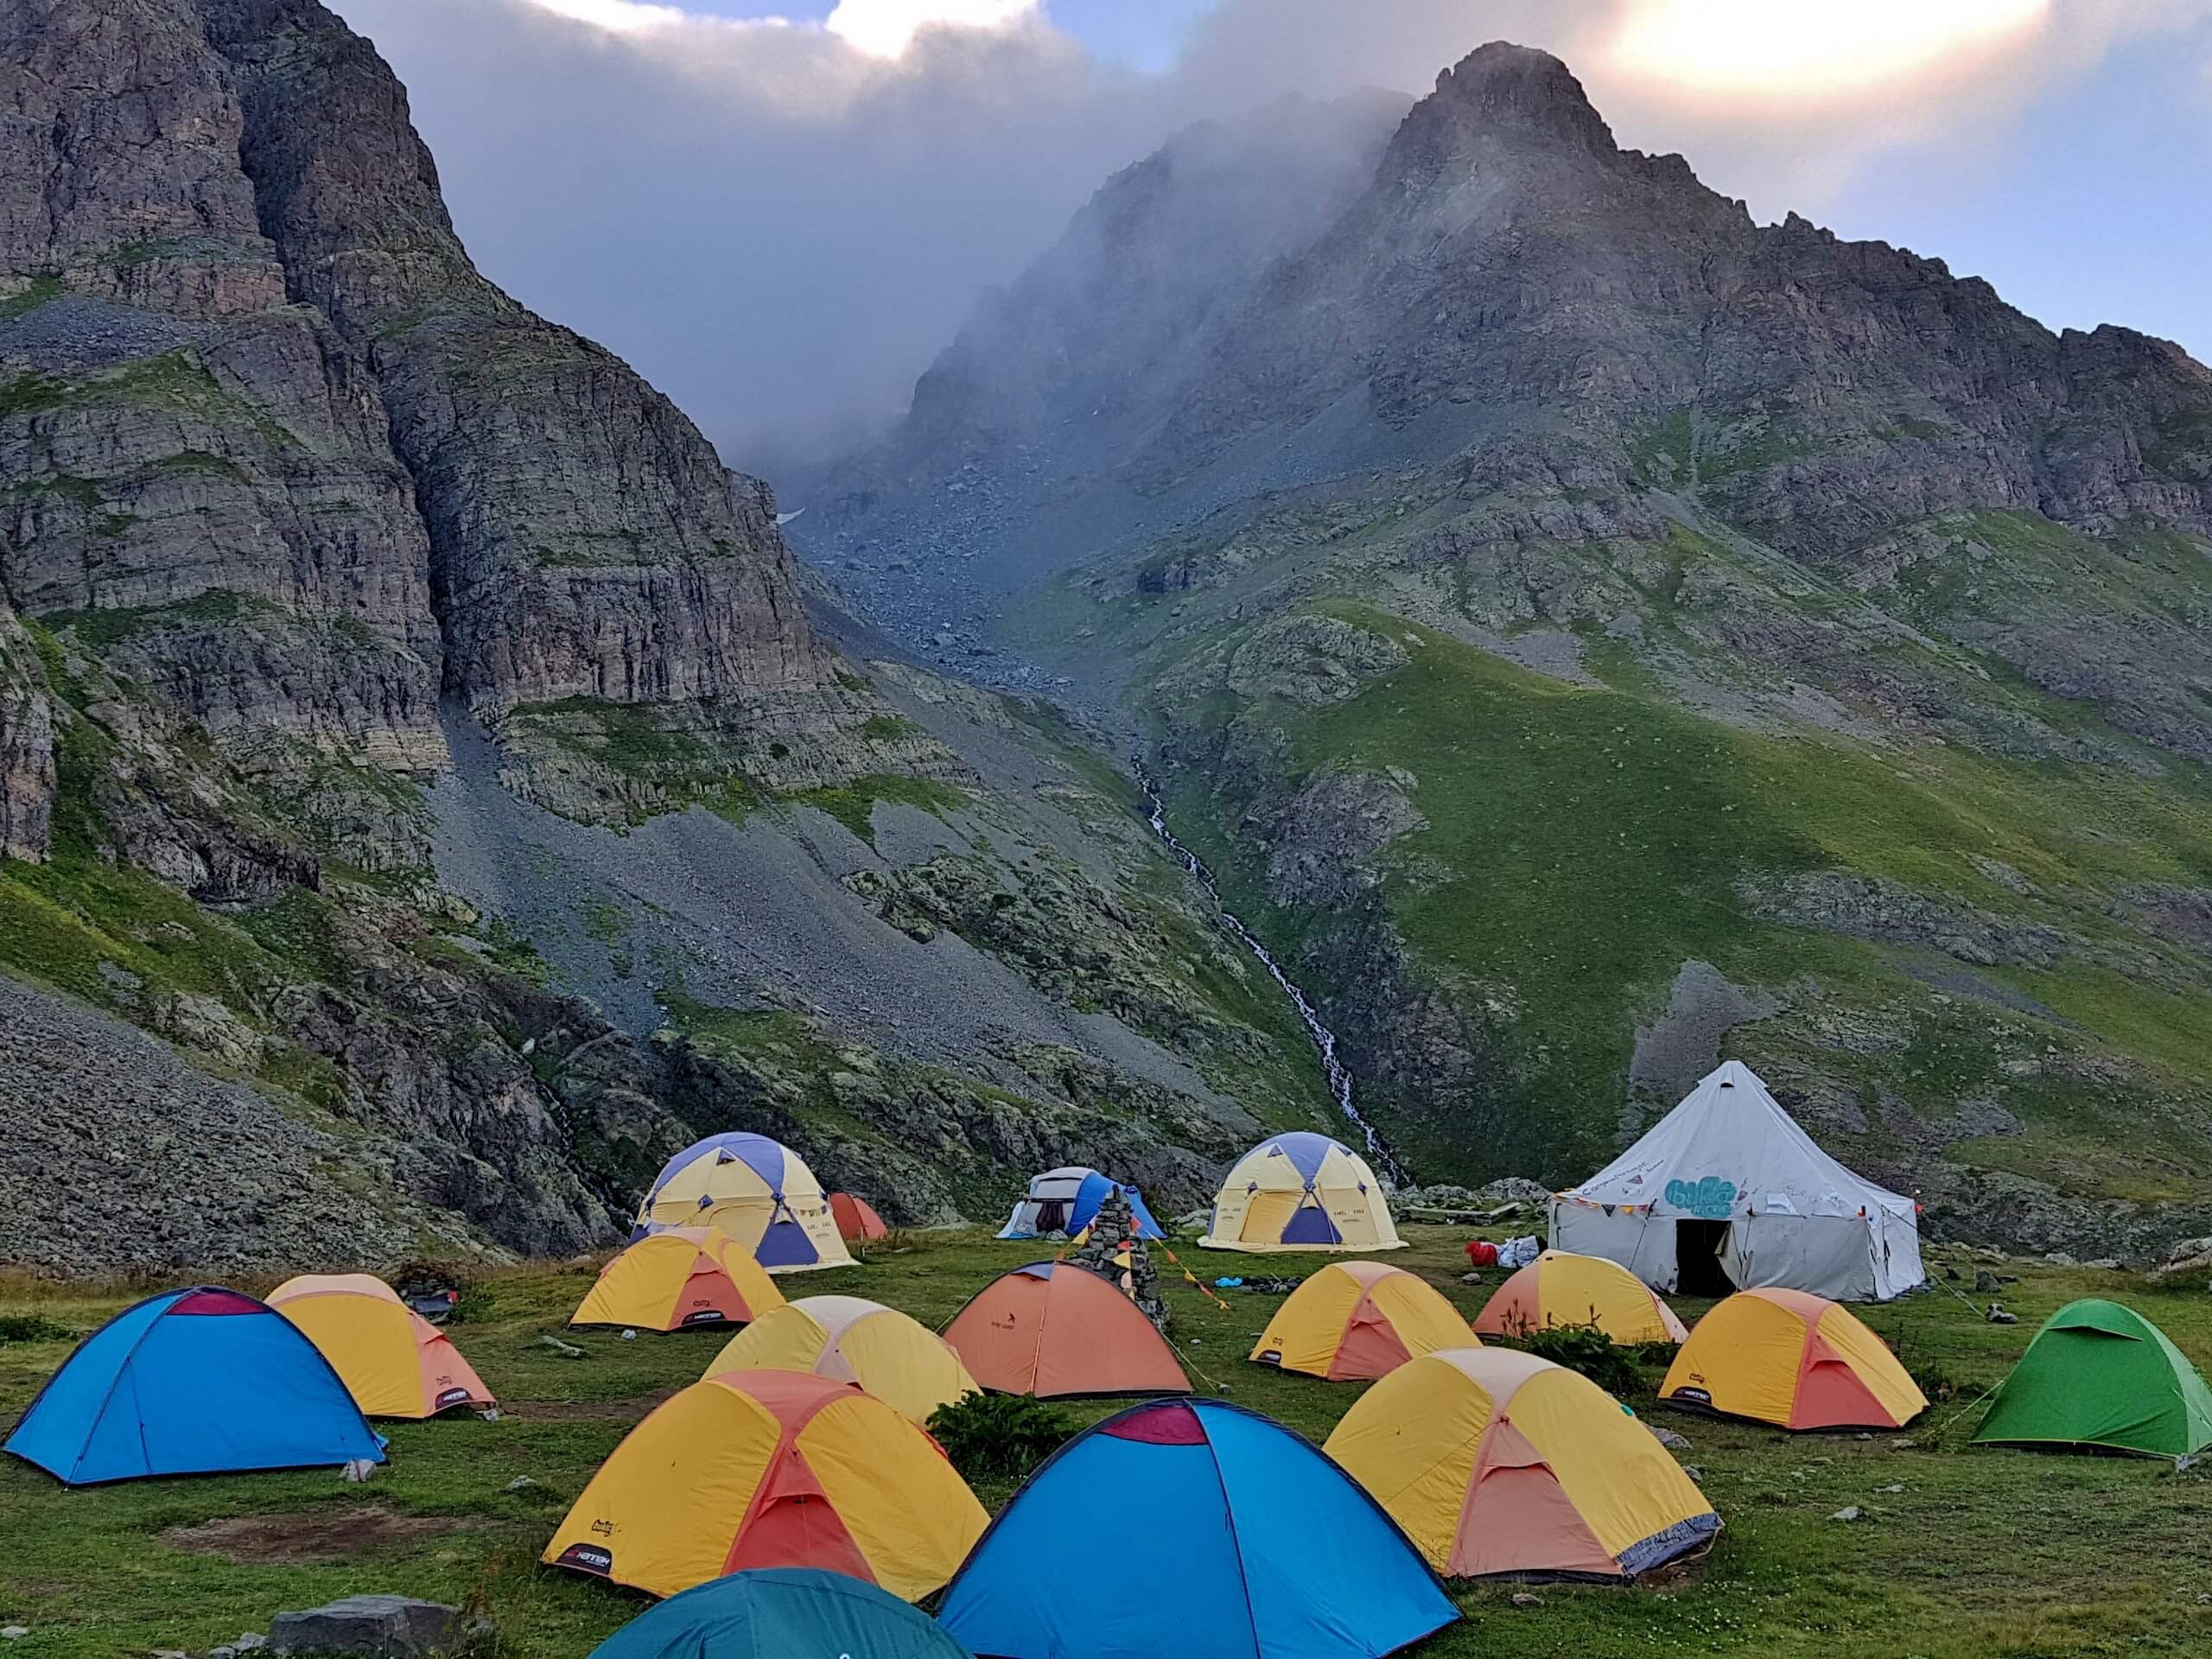 Tent village along the stunning mountains in Pontic Alps